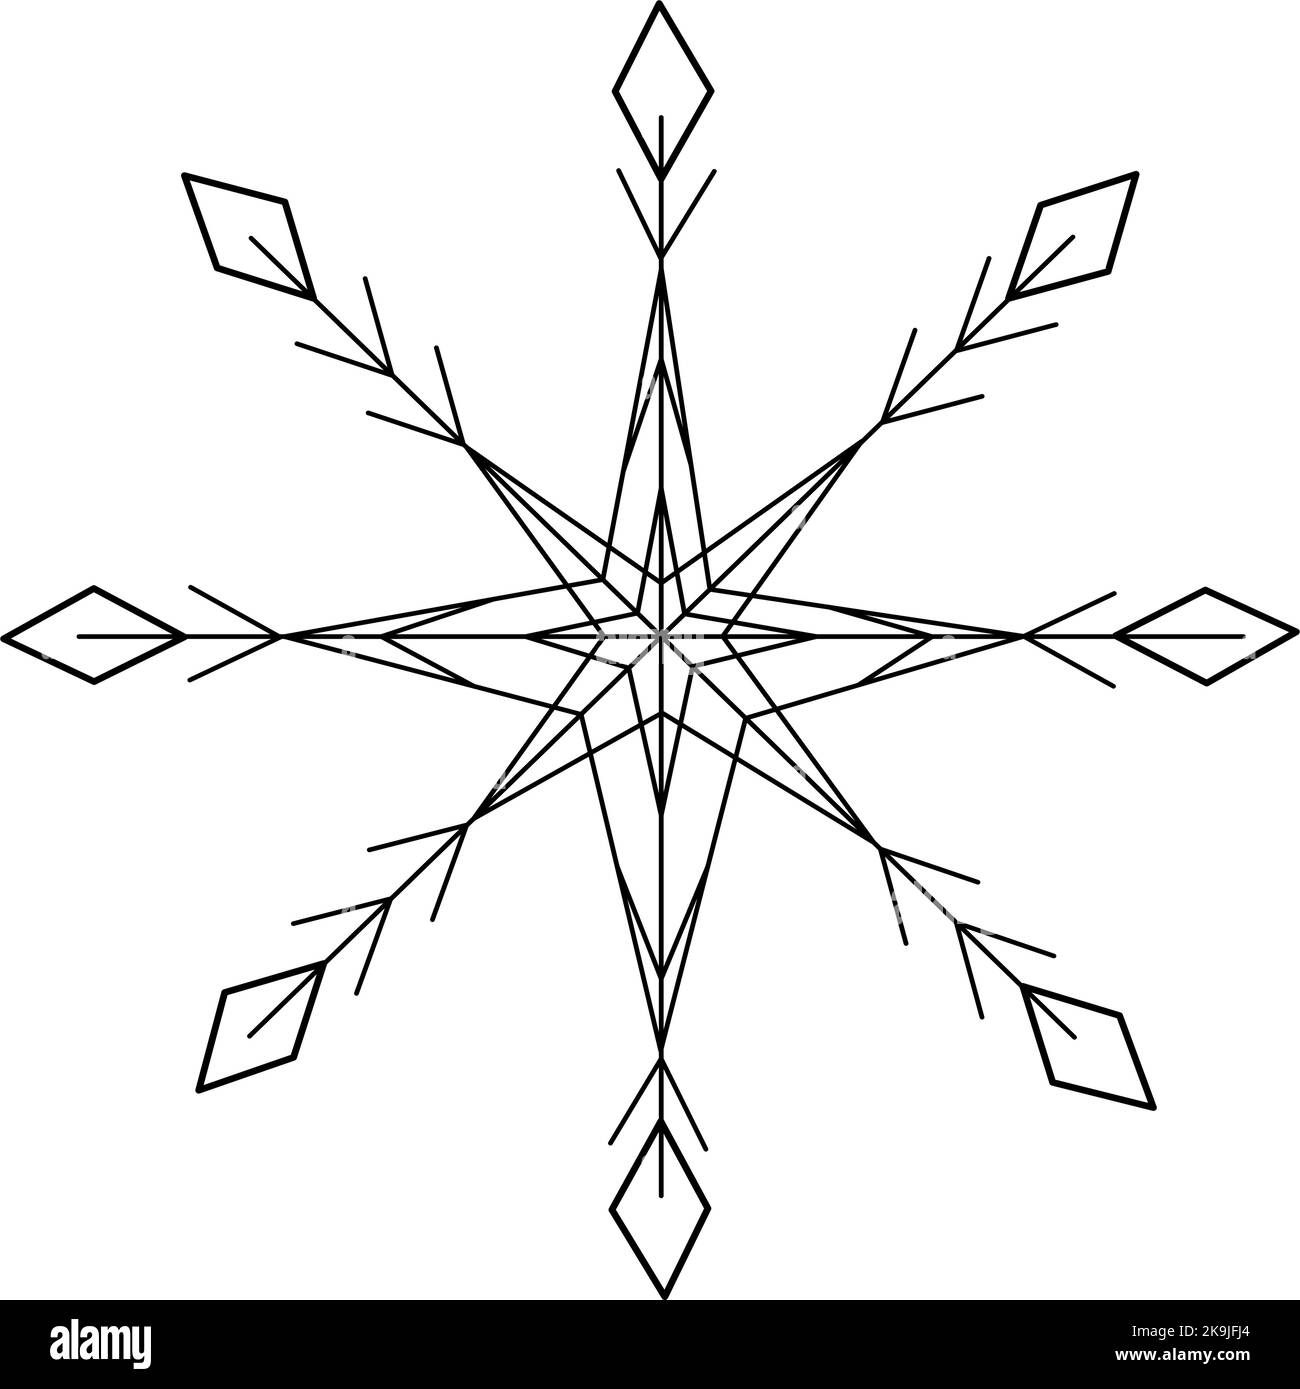 Abstract patterned outline draw snowflake with elegance element in a minimalist style. Line art. Isolate. Suitable for banner, icon, postcard, poster, label, greeting card, background, brochure. EPS Stock Vector